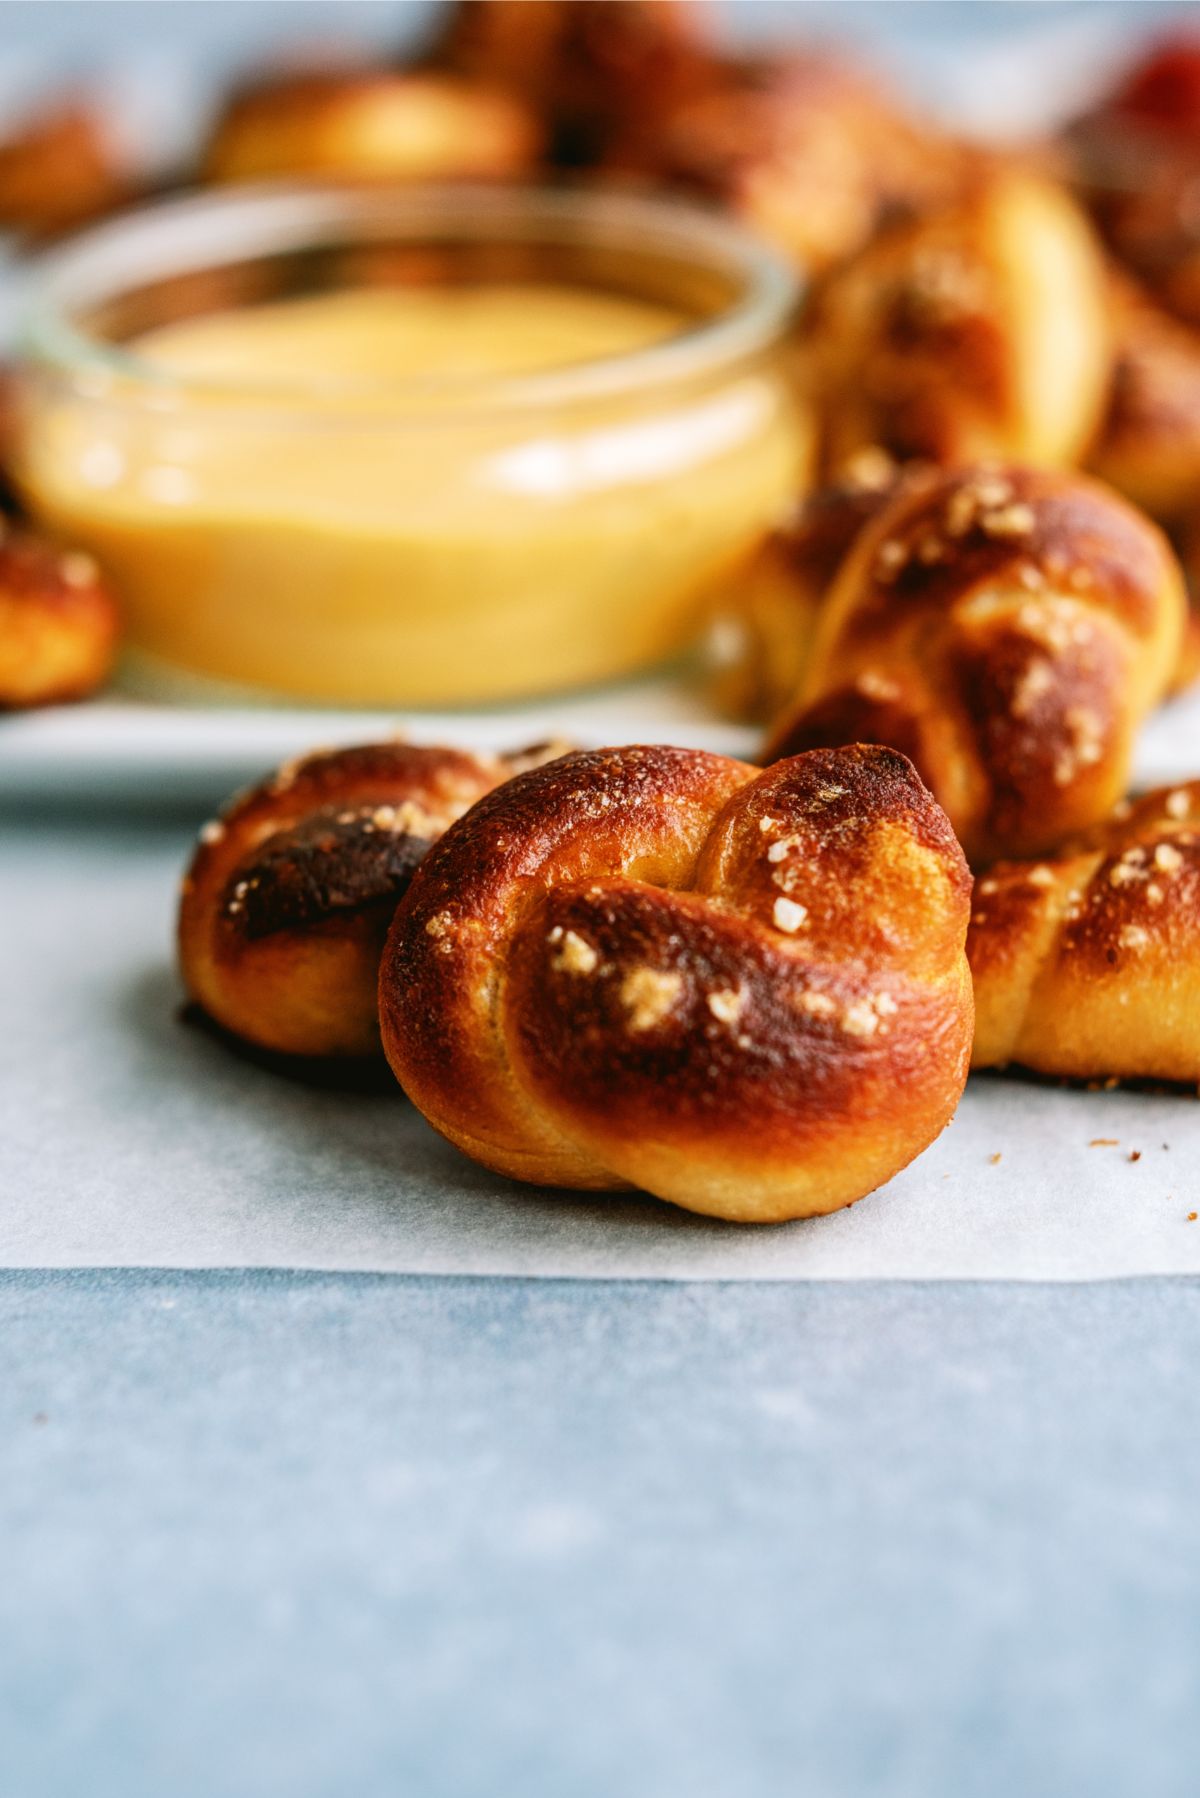 Twisted Soft Pretzel Bites with a side of queso